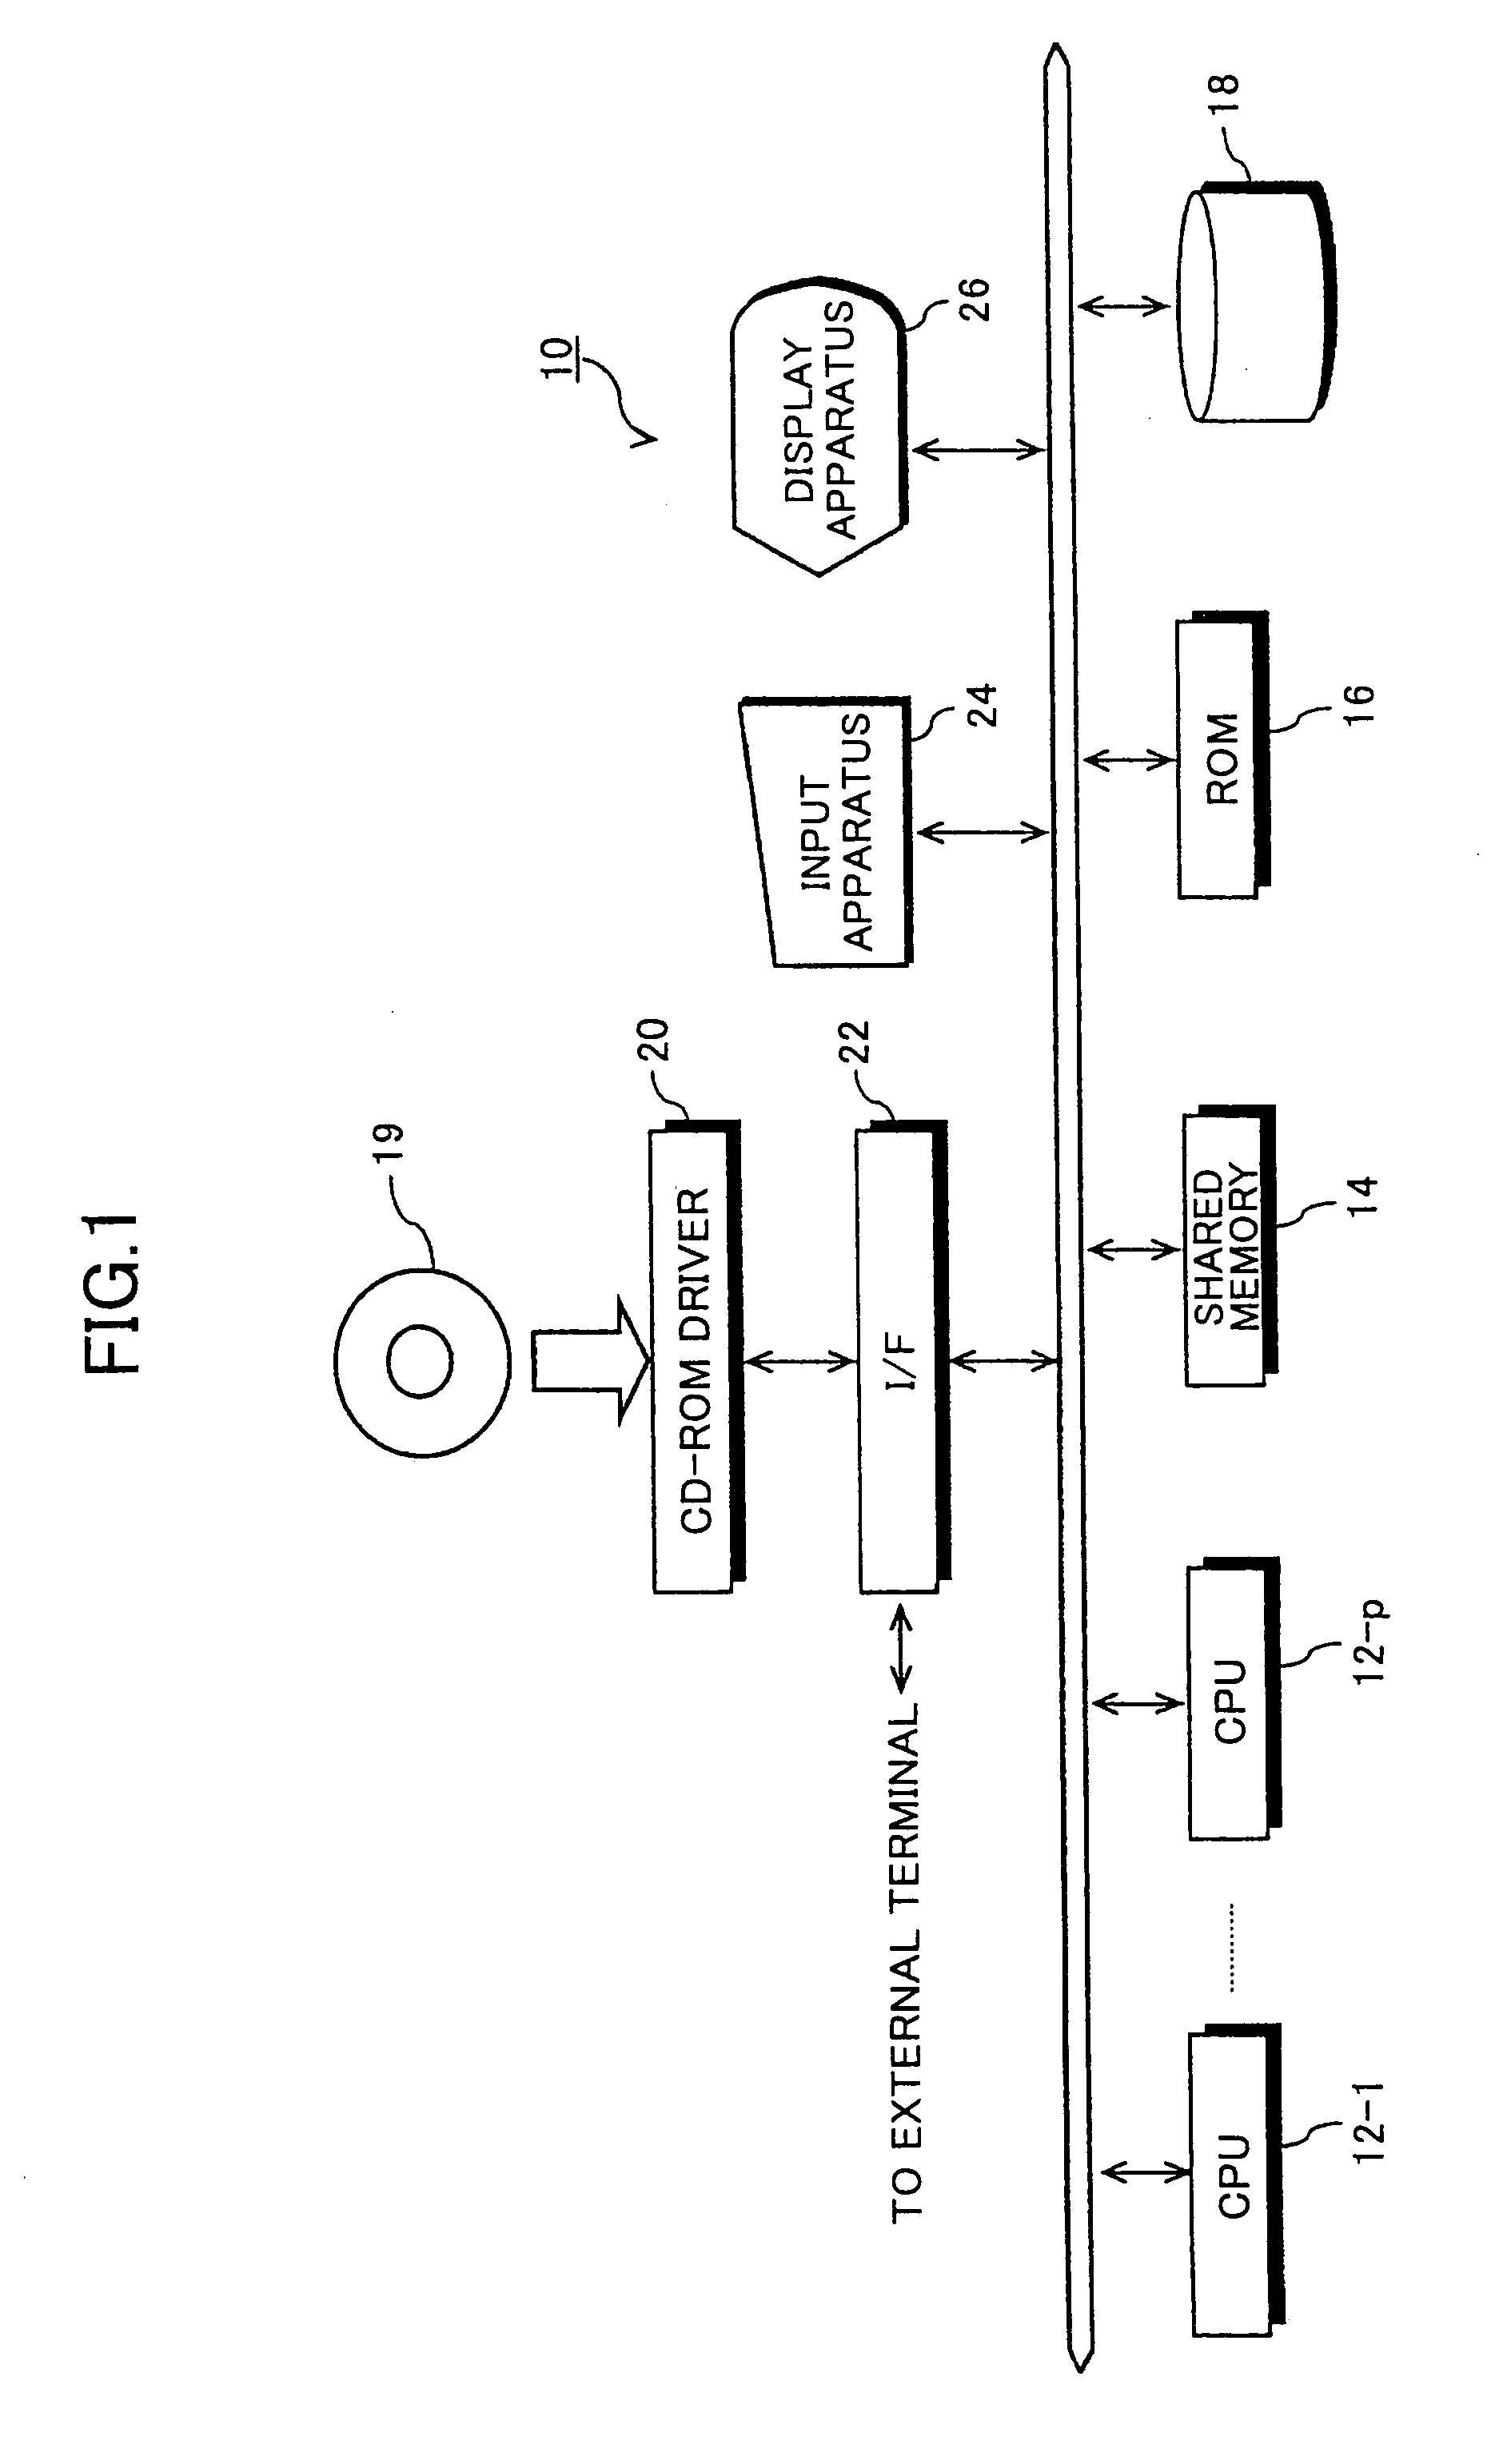 Shared-memory multiprocessor system and method for processing information